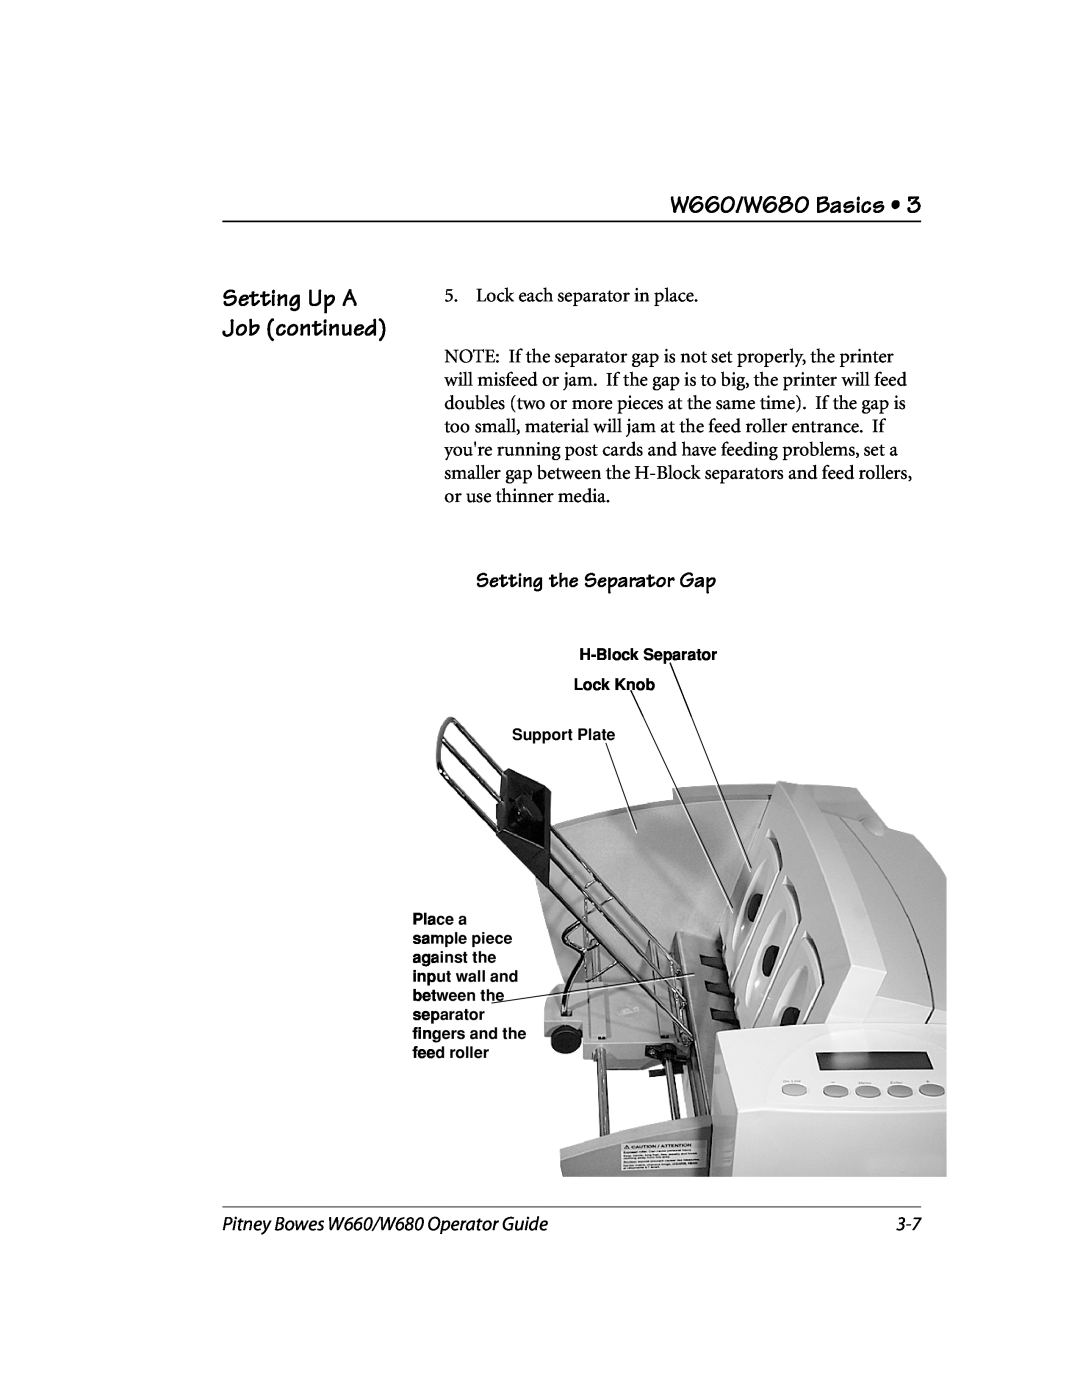 Pitney Bowes manual Setting the Separator Gap, W660/W680 Basics, Setting Up A Job continued 